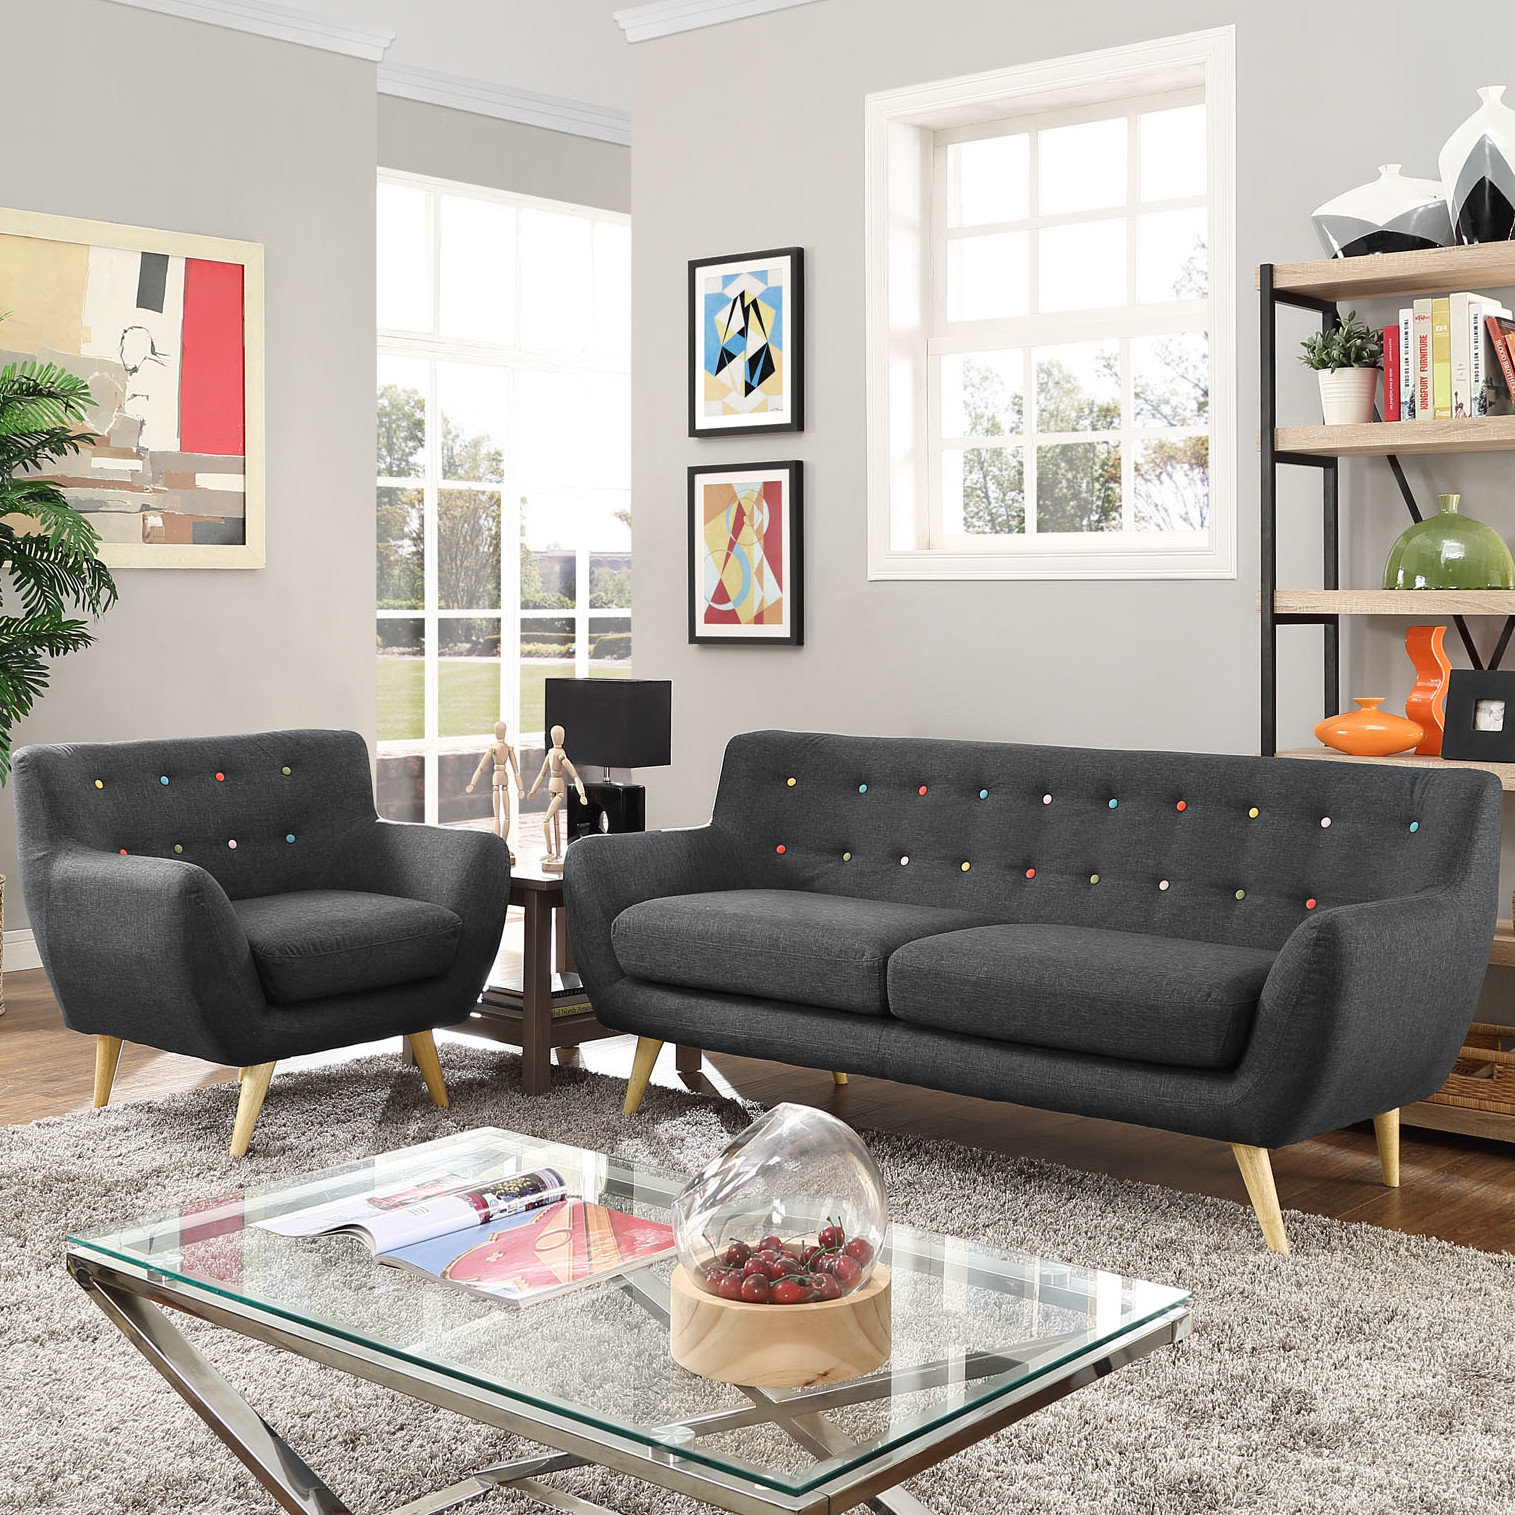 Modern Living Room Sets Cheap
 11 Clever Tricks of How to Improve Cheap Living Room